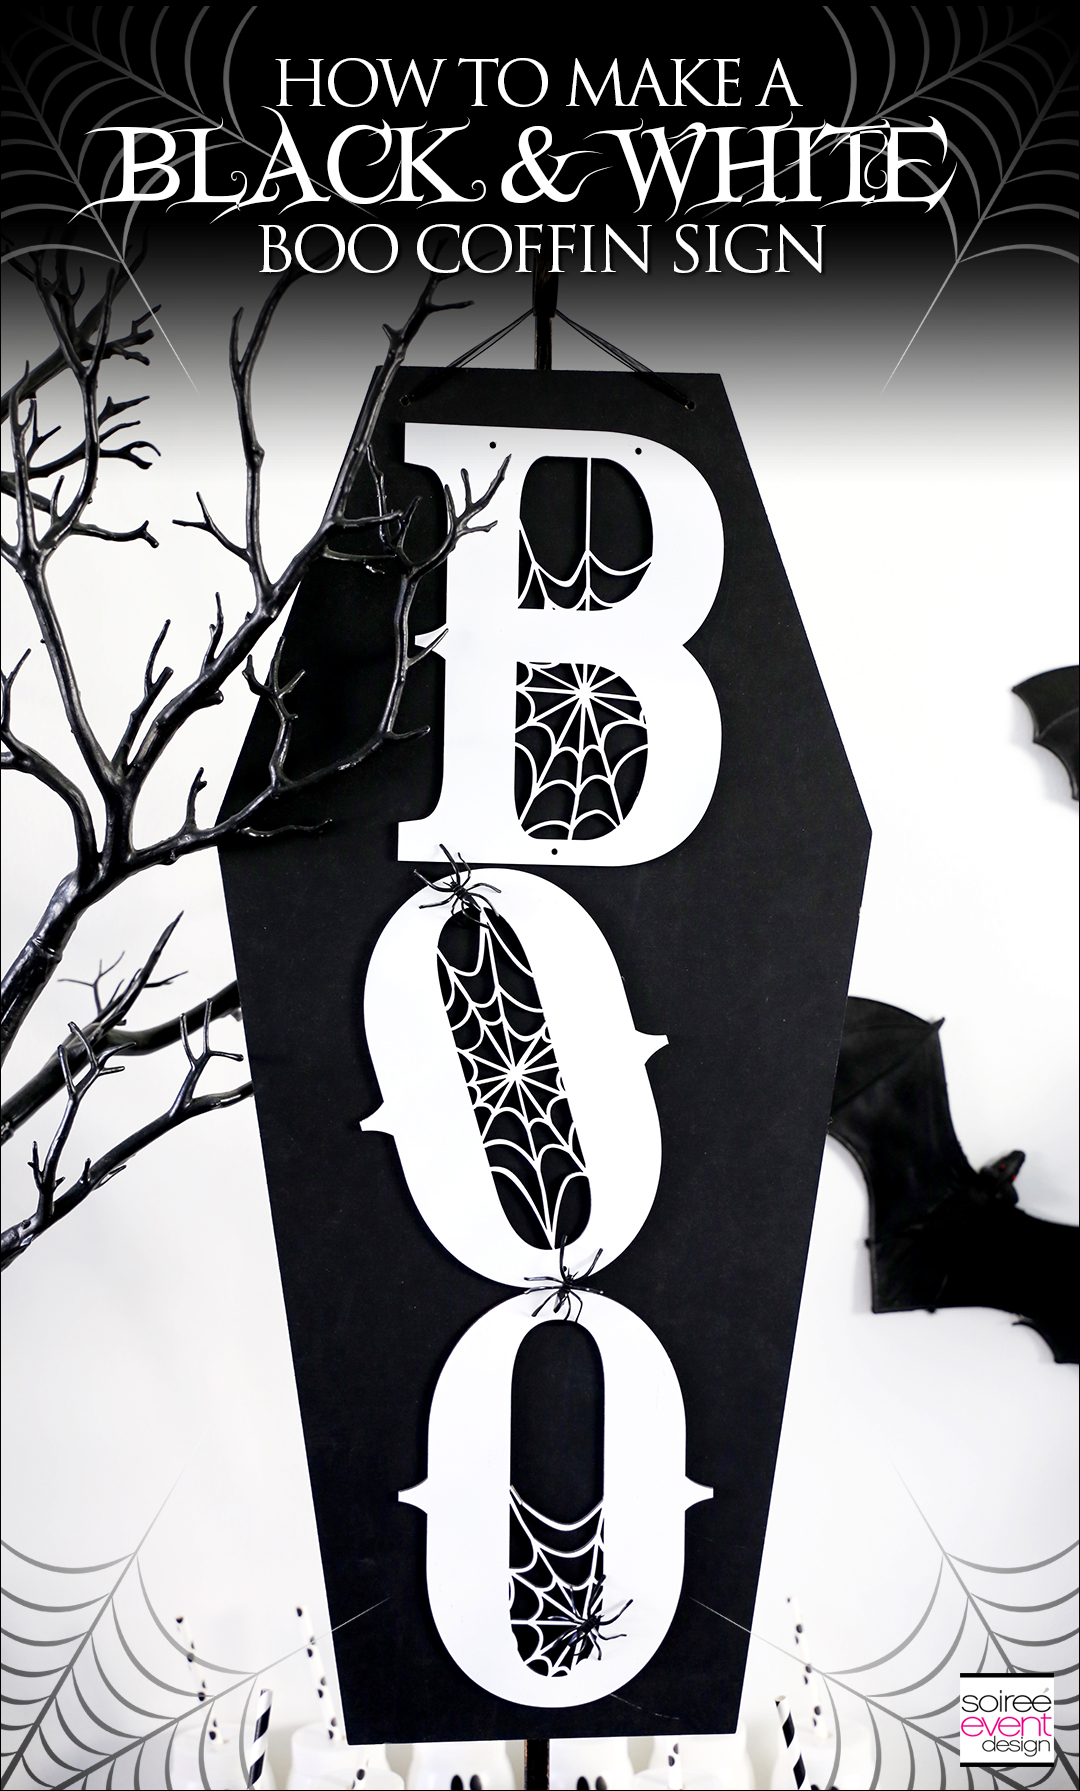 Black and White Halloween Party - DIY Boo Coffin Wall Sign